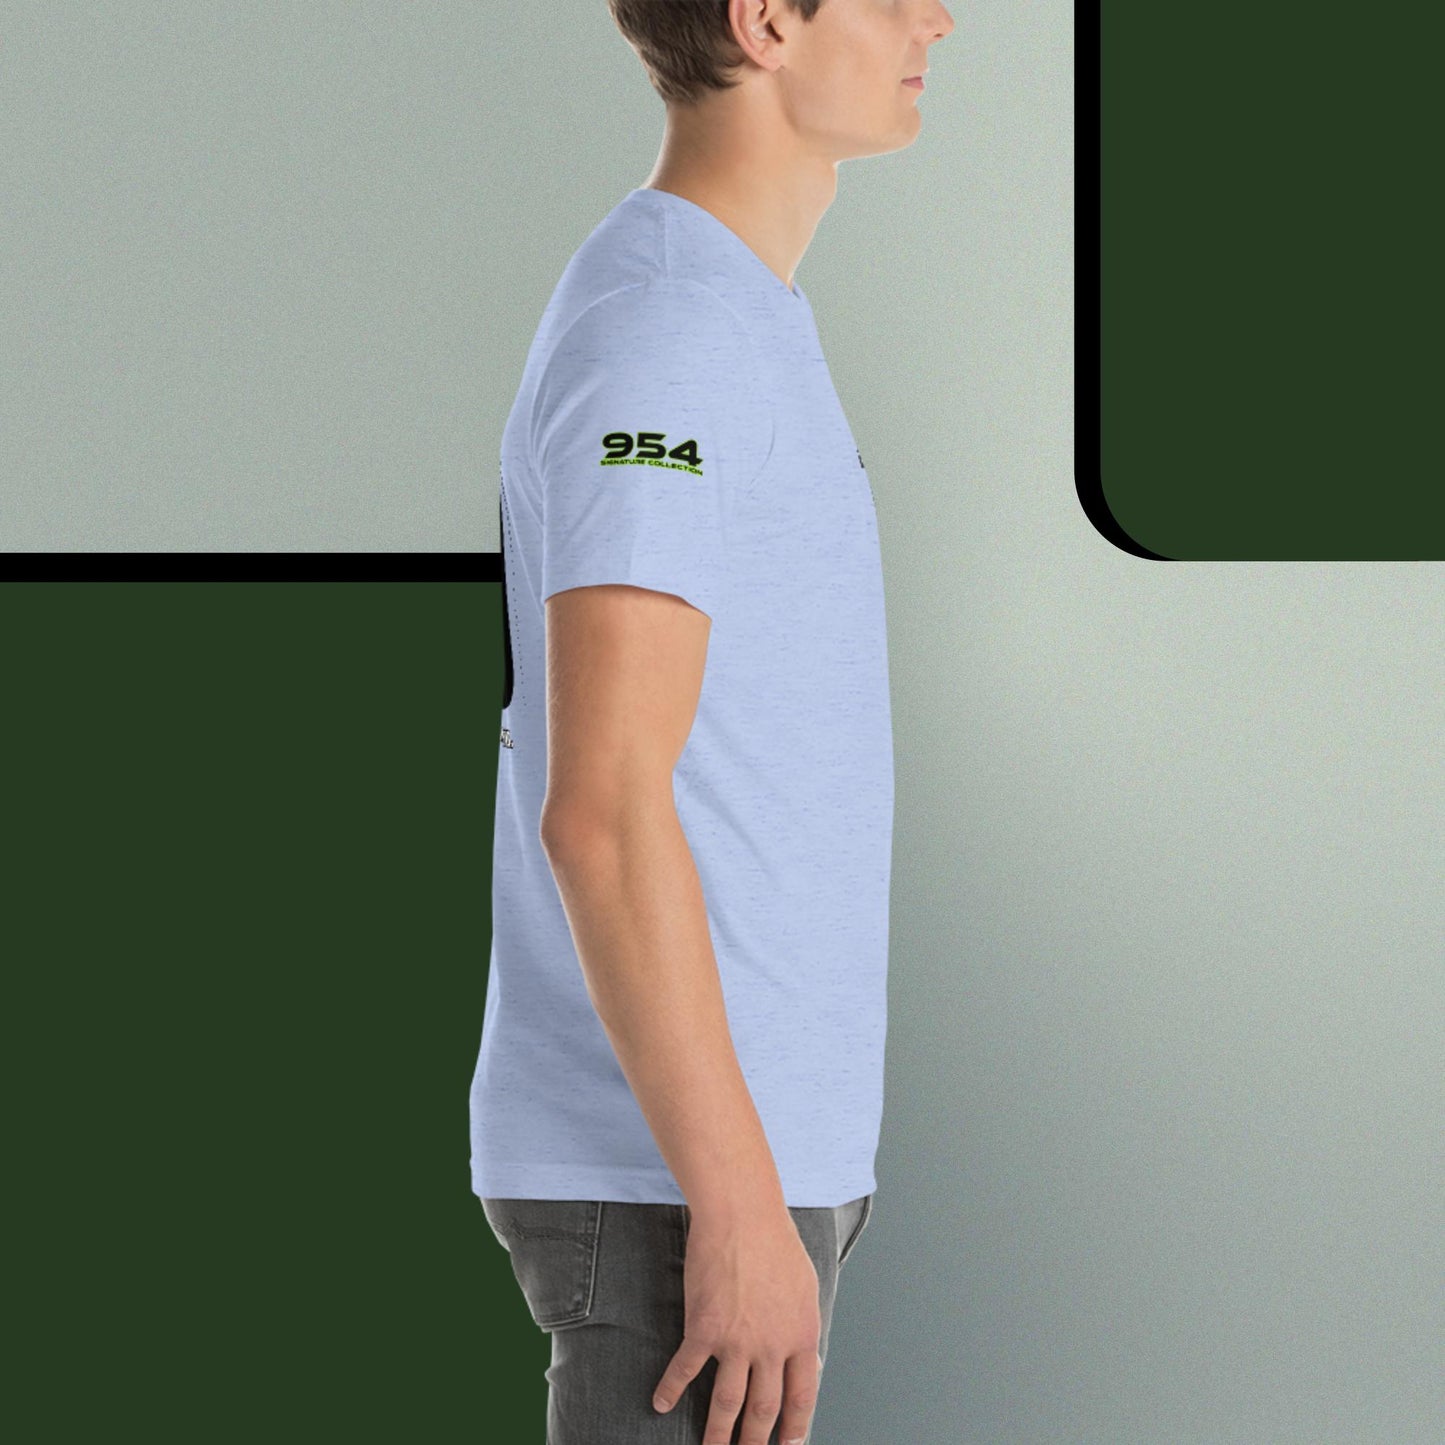 Take With You 954 Collection Unisex t-shirt